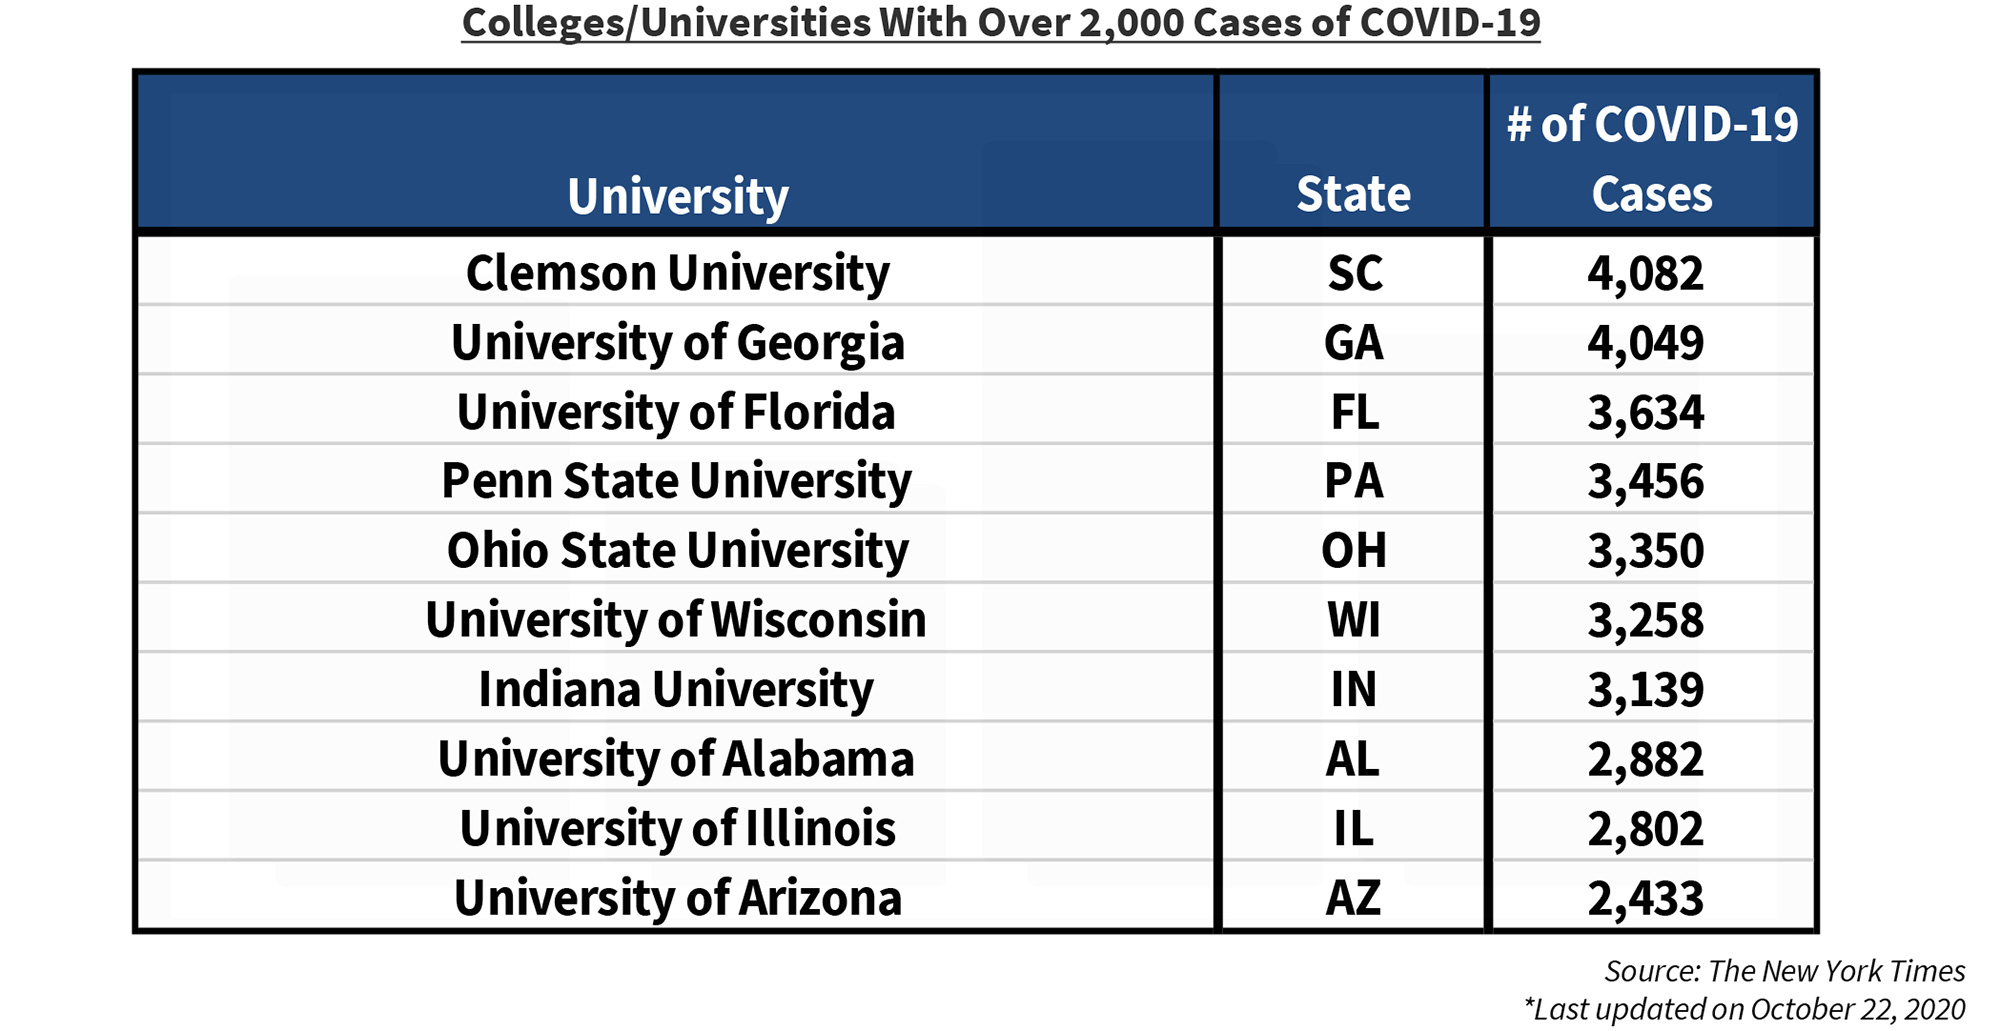 Colleges/Universities With Over 2,000 Cases of COVID-19